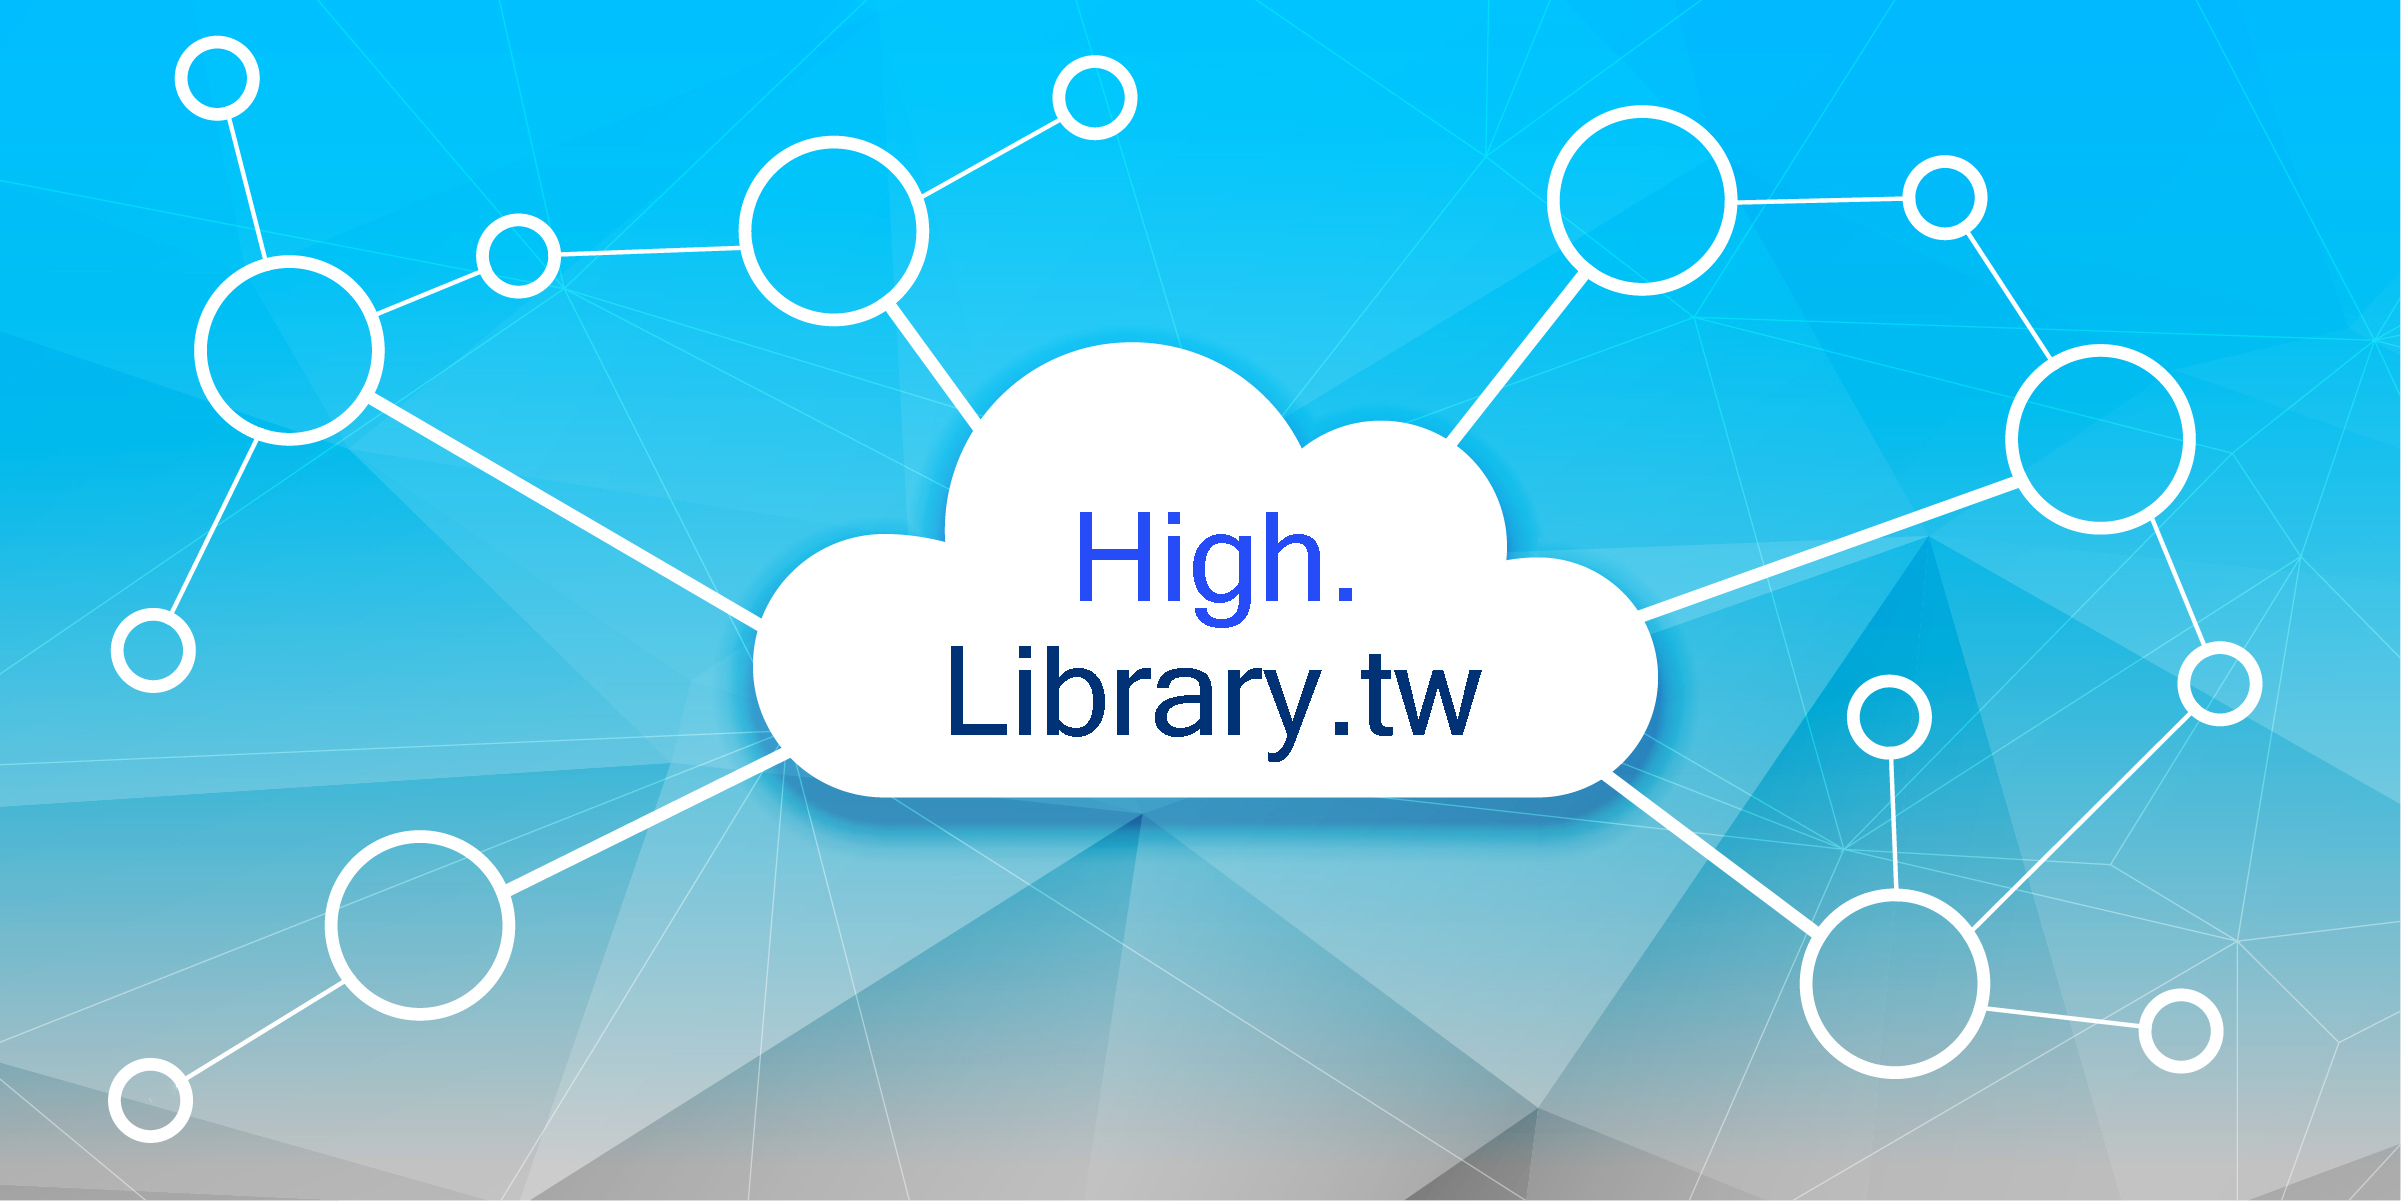 Cloud of Library in Taiwan for High